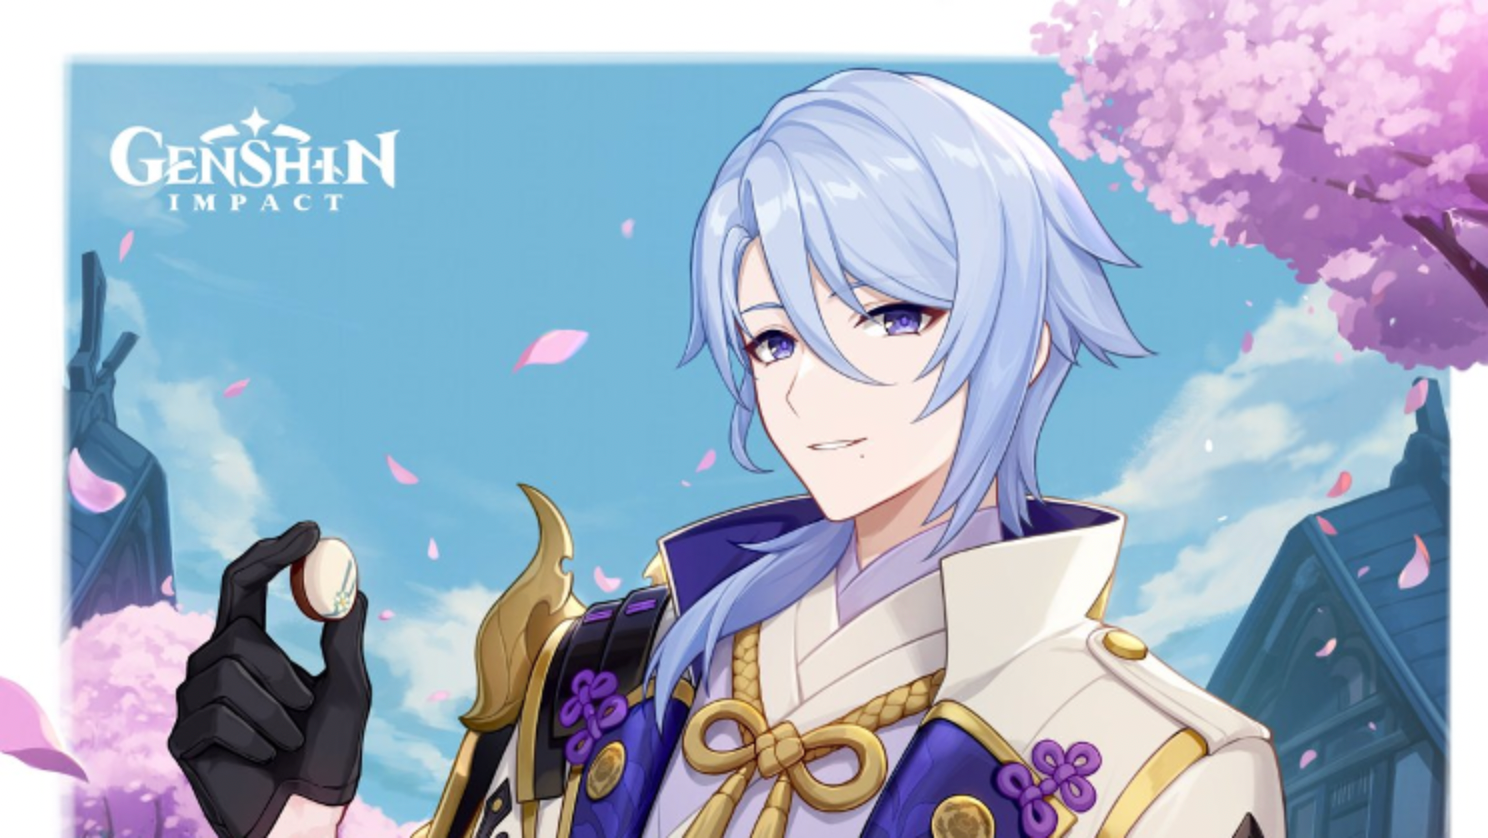 Genshin Impact White Day Character Art Features Ayato, Itto, and Xiao